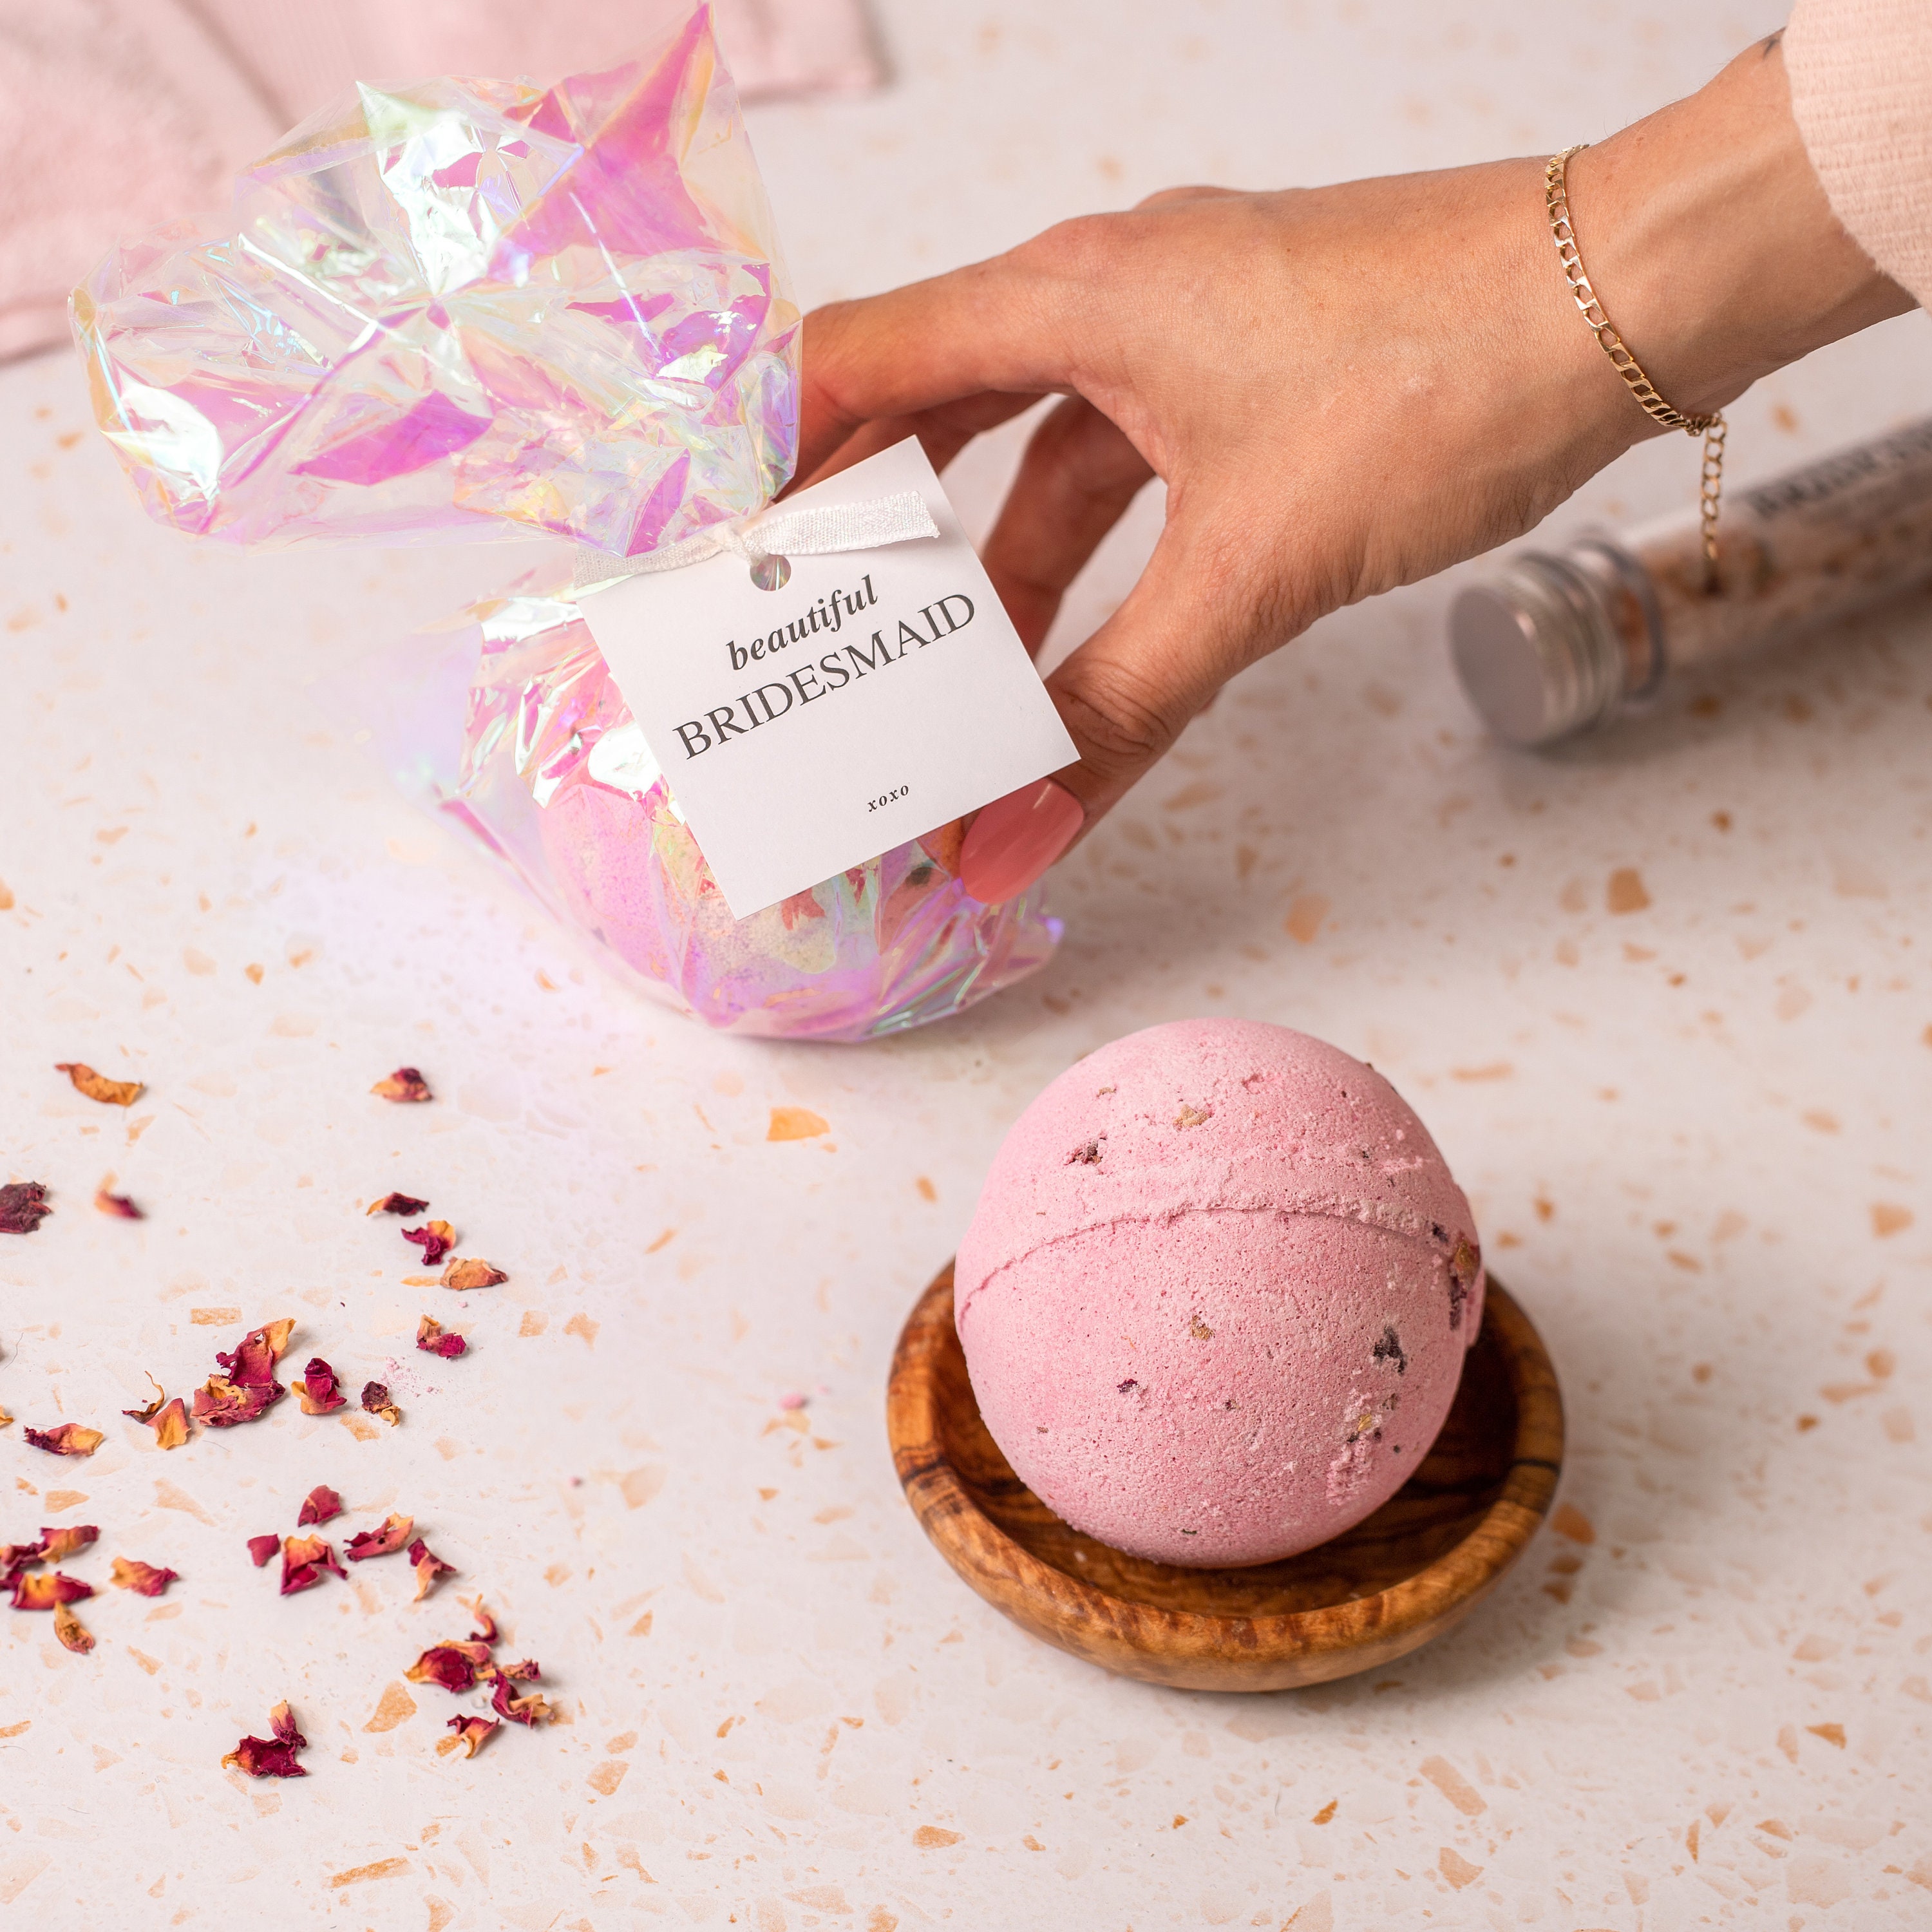 4 Willy Bath Bombs in Aroma Bomb Fragrance With Pink Glitter 